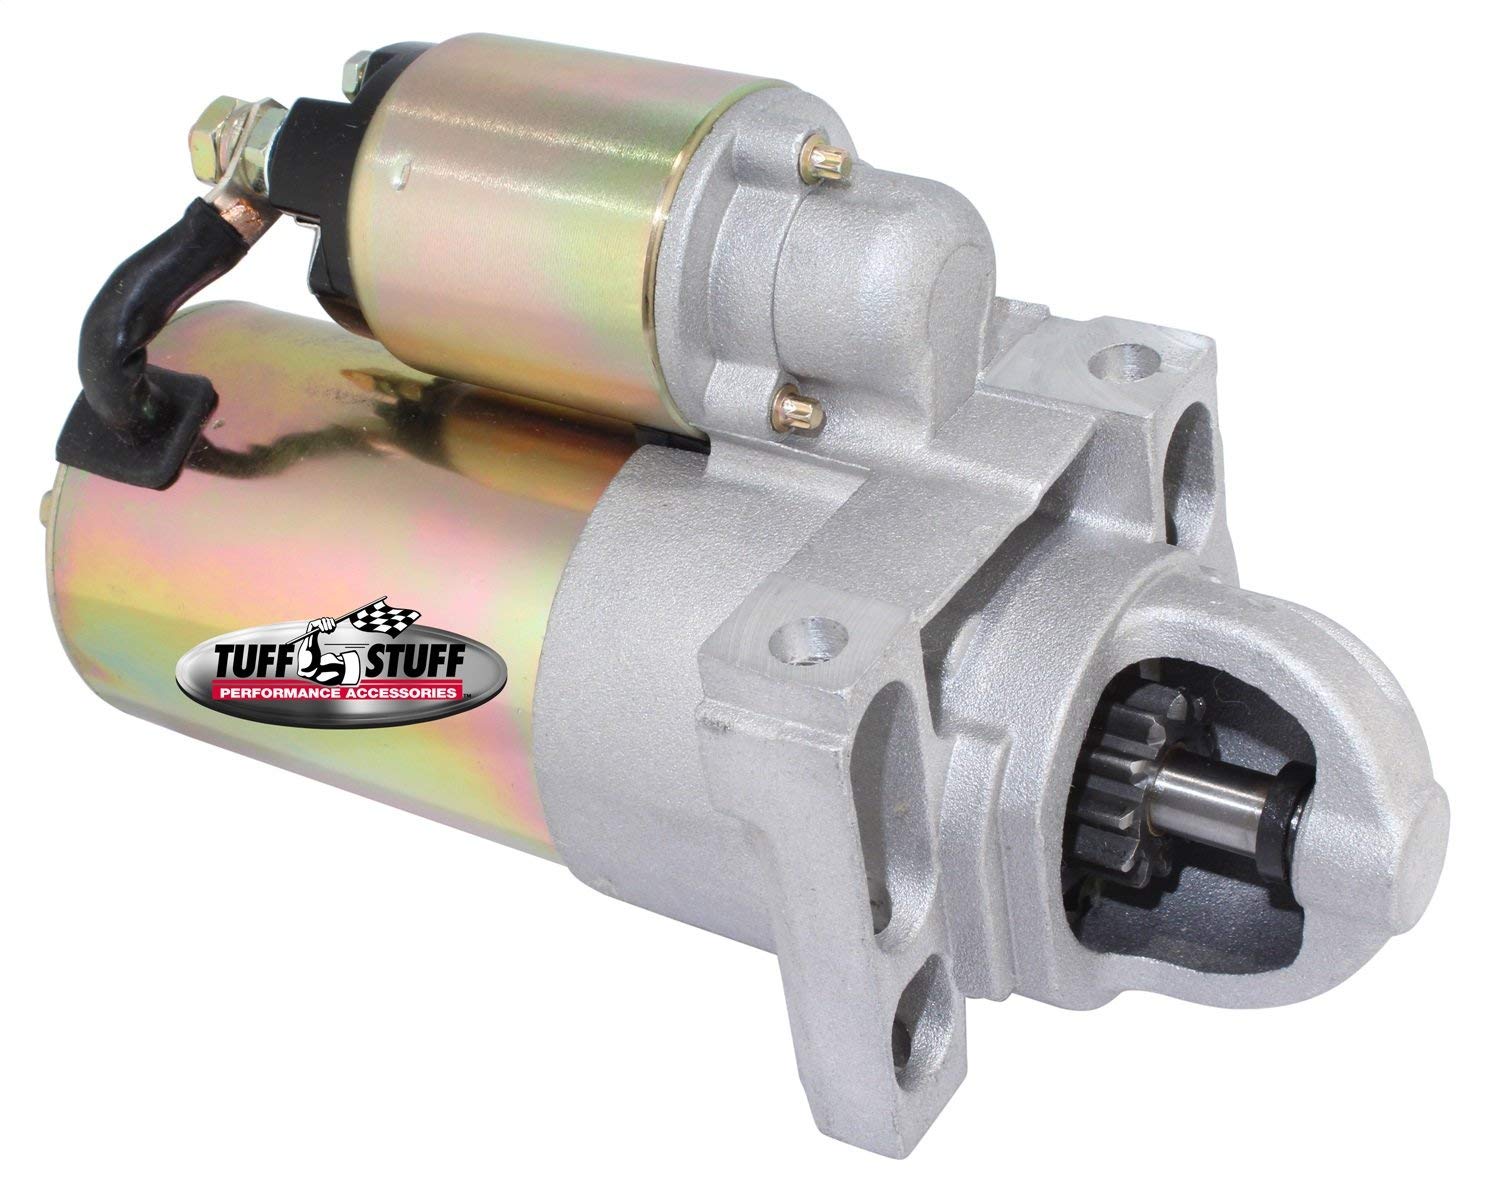 Tuff Stuff 6584B Gear Reduction Starter for Chevy 